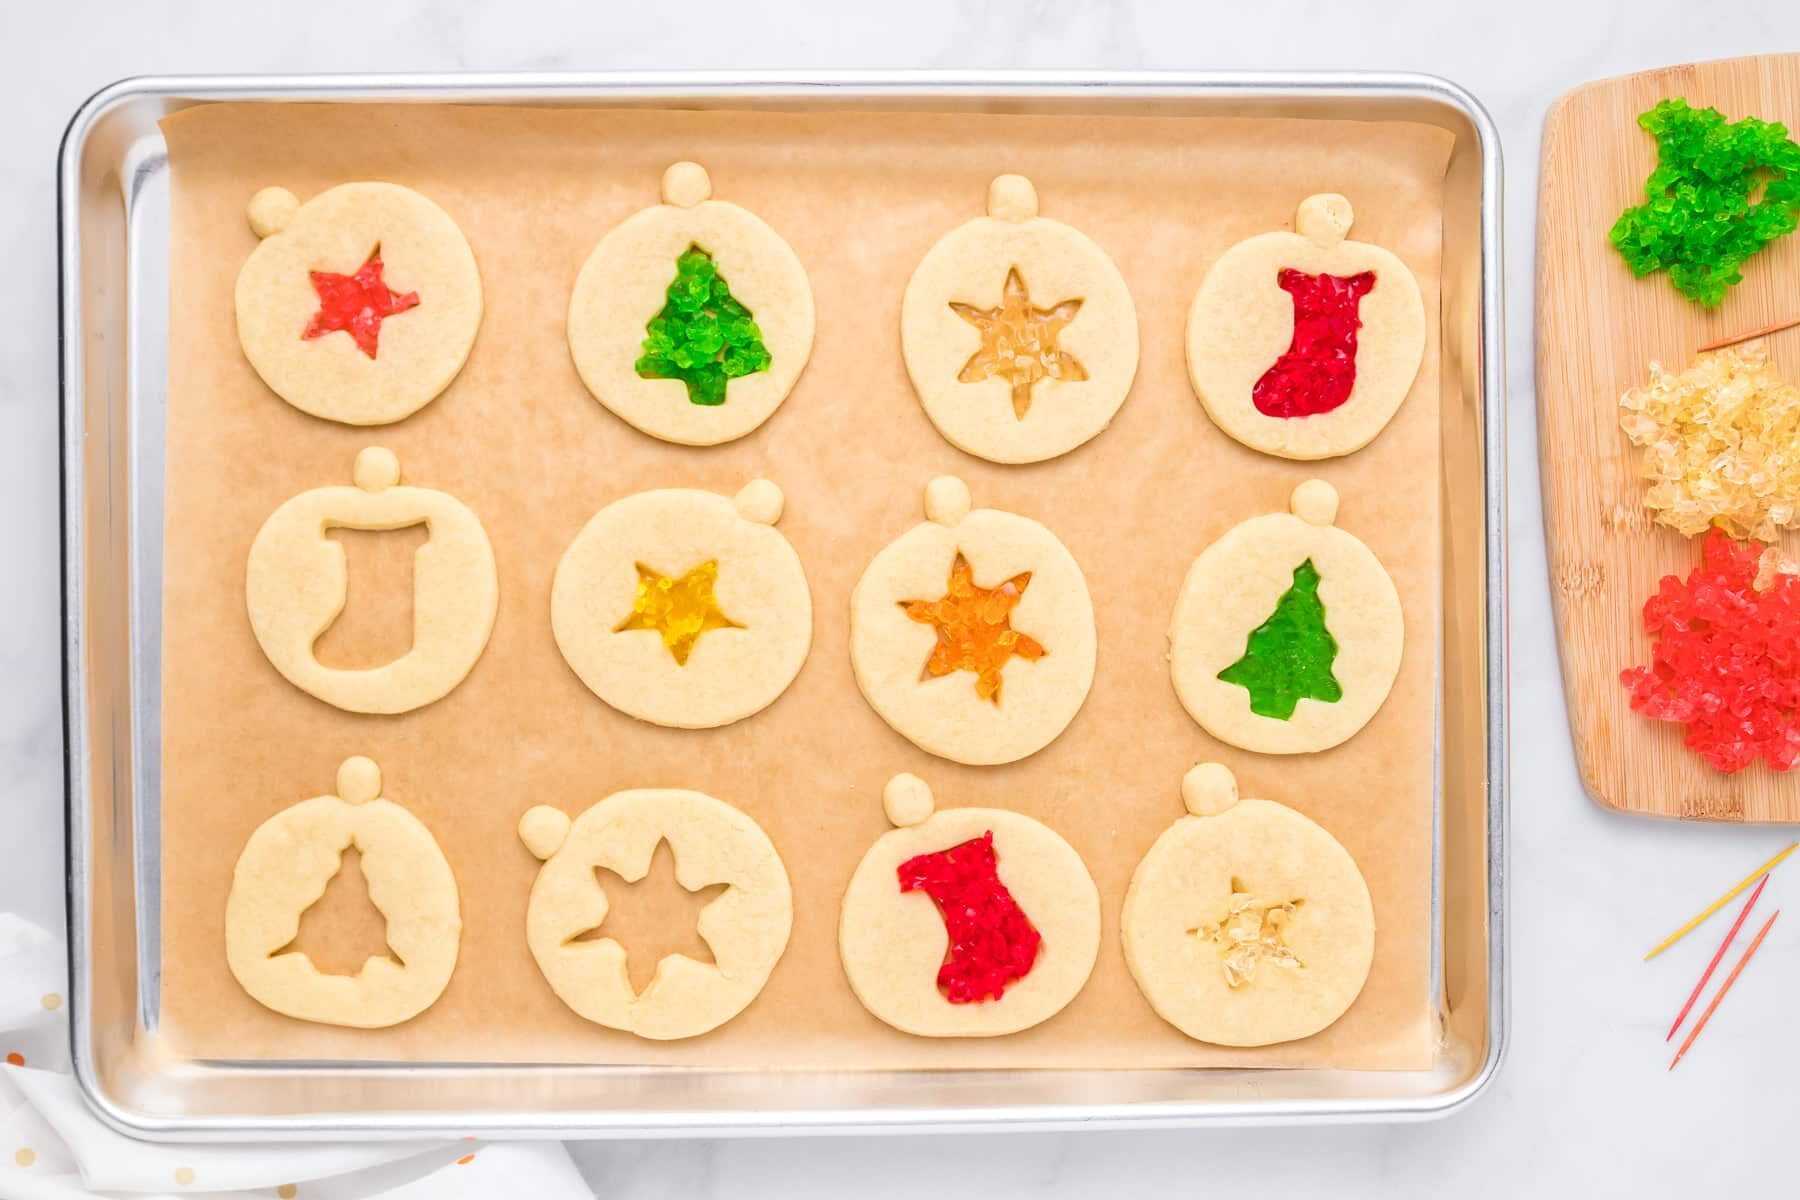 A tray of cookies with gummy ornaments on it.